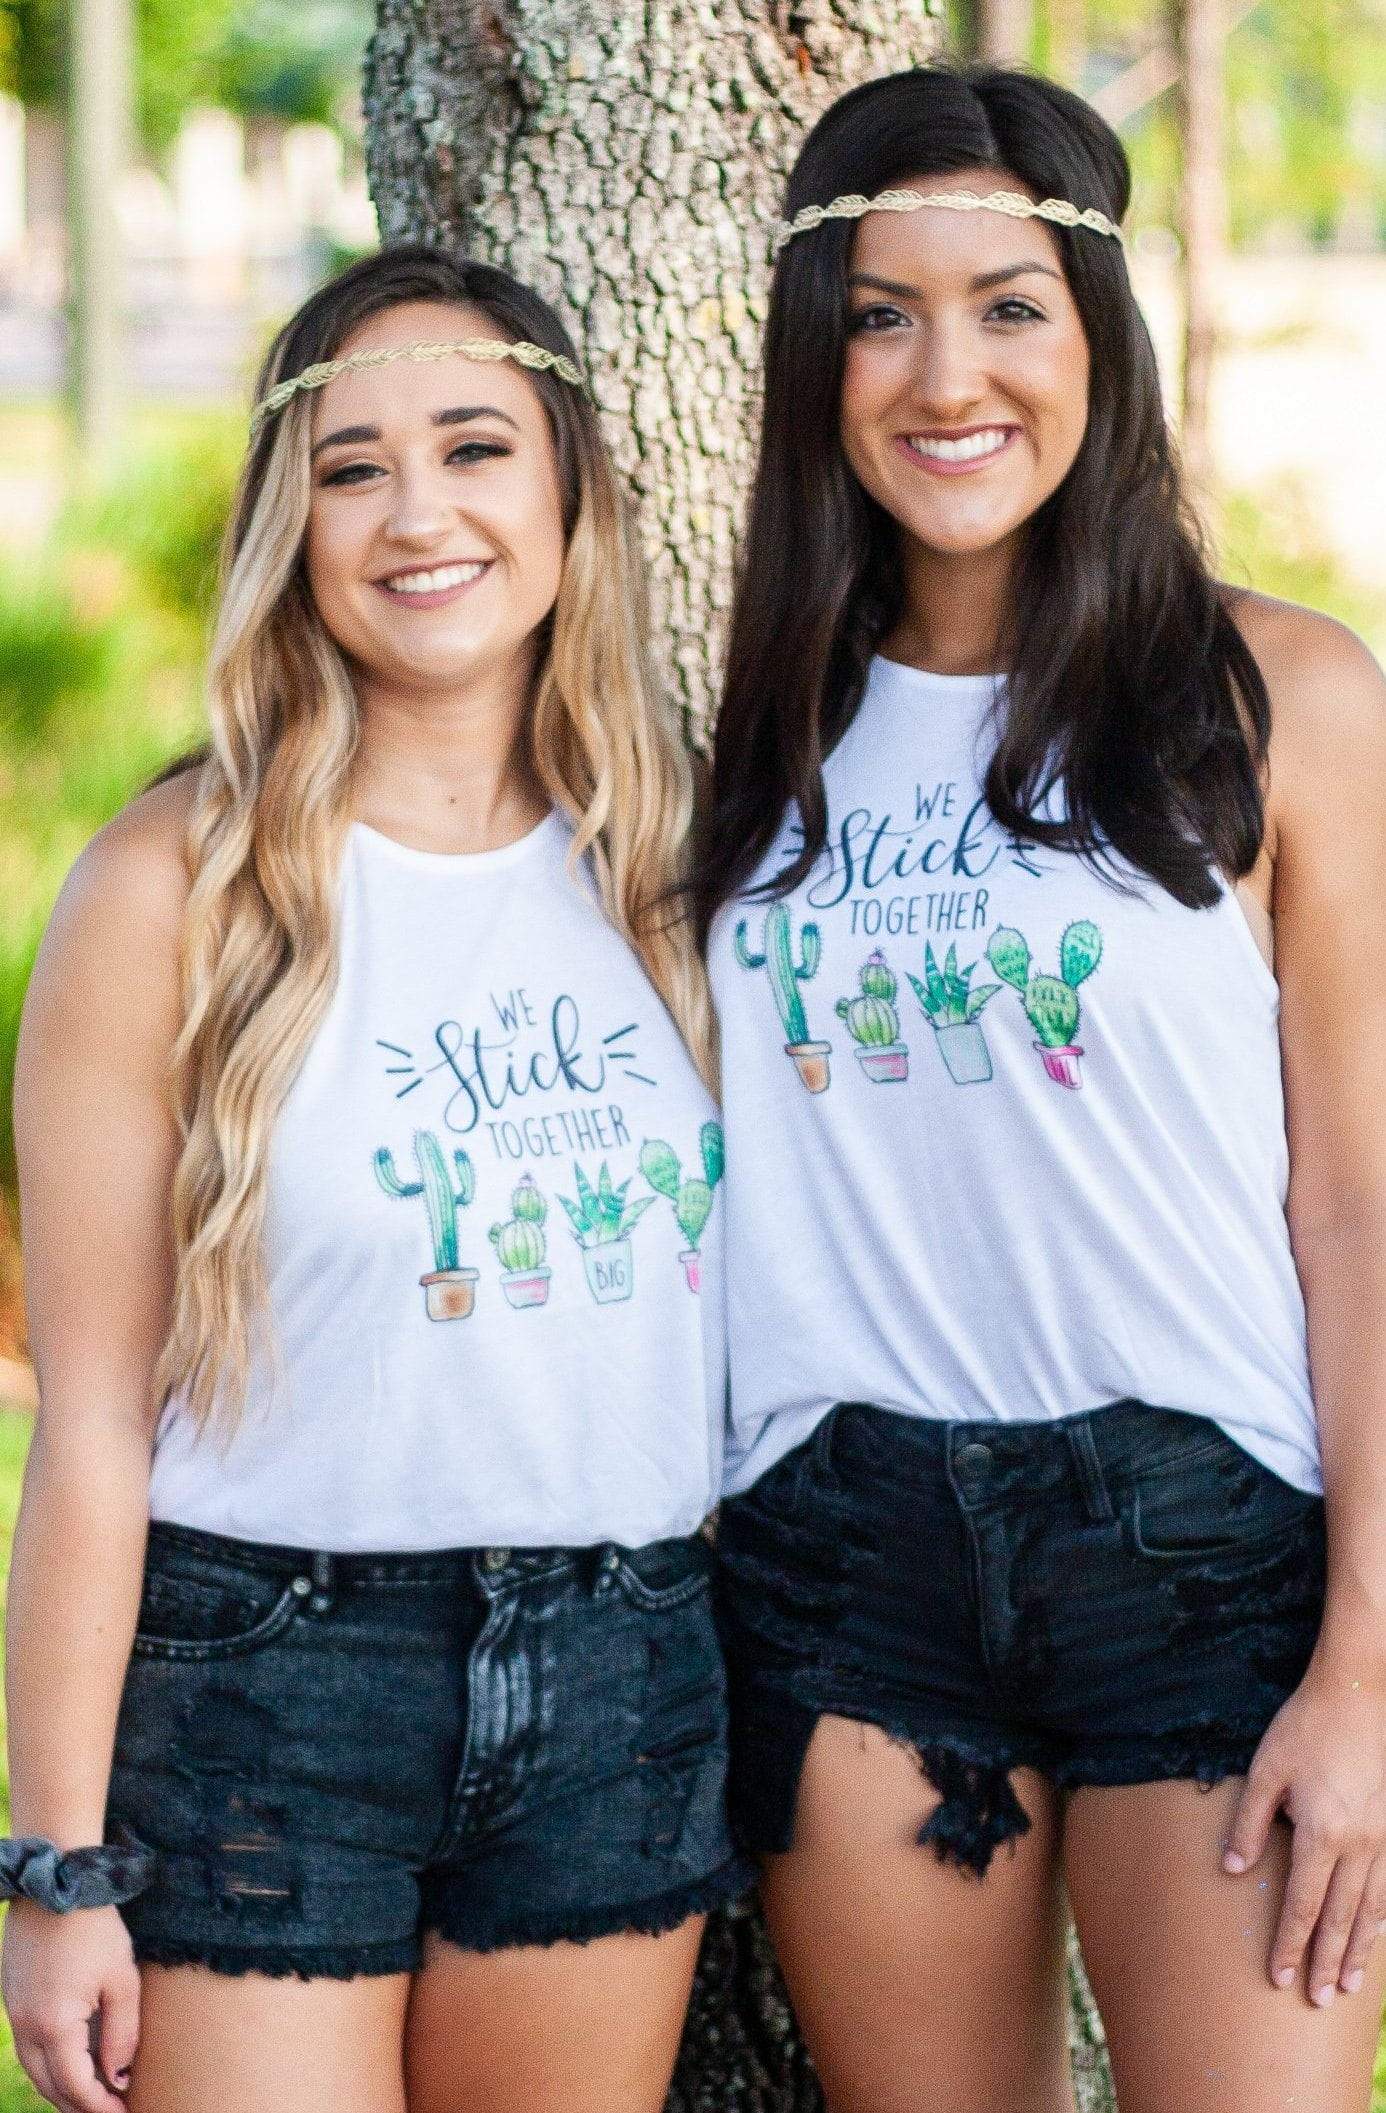 Big Little We Stick Together Tank - Bella Flowy High Neck, Ladies, Sunny and Southern, - Sunny and Southern,